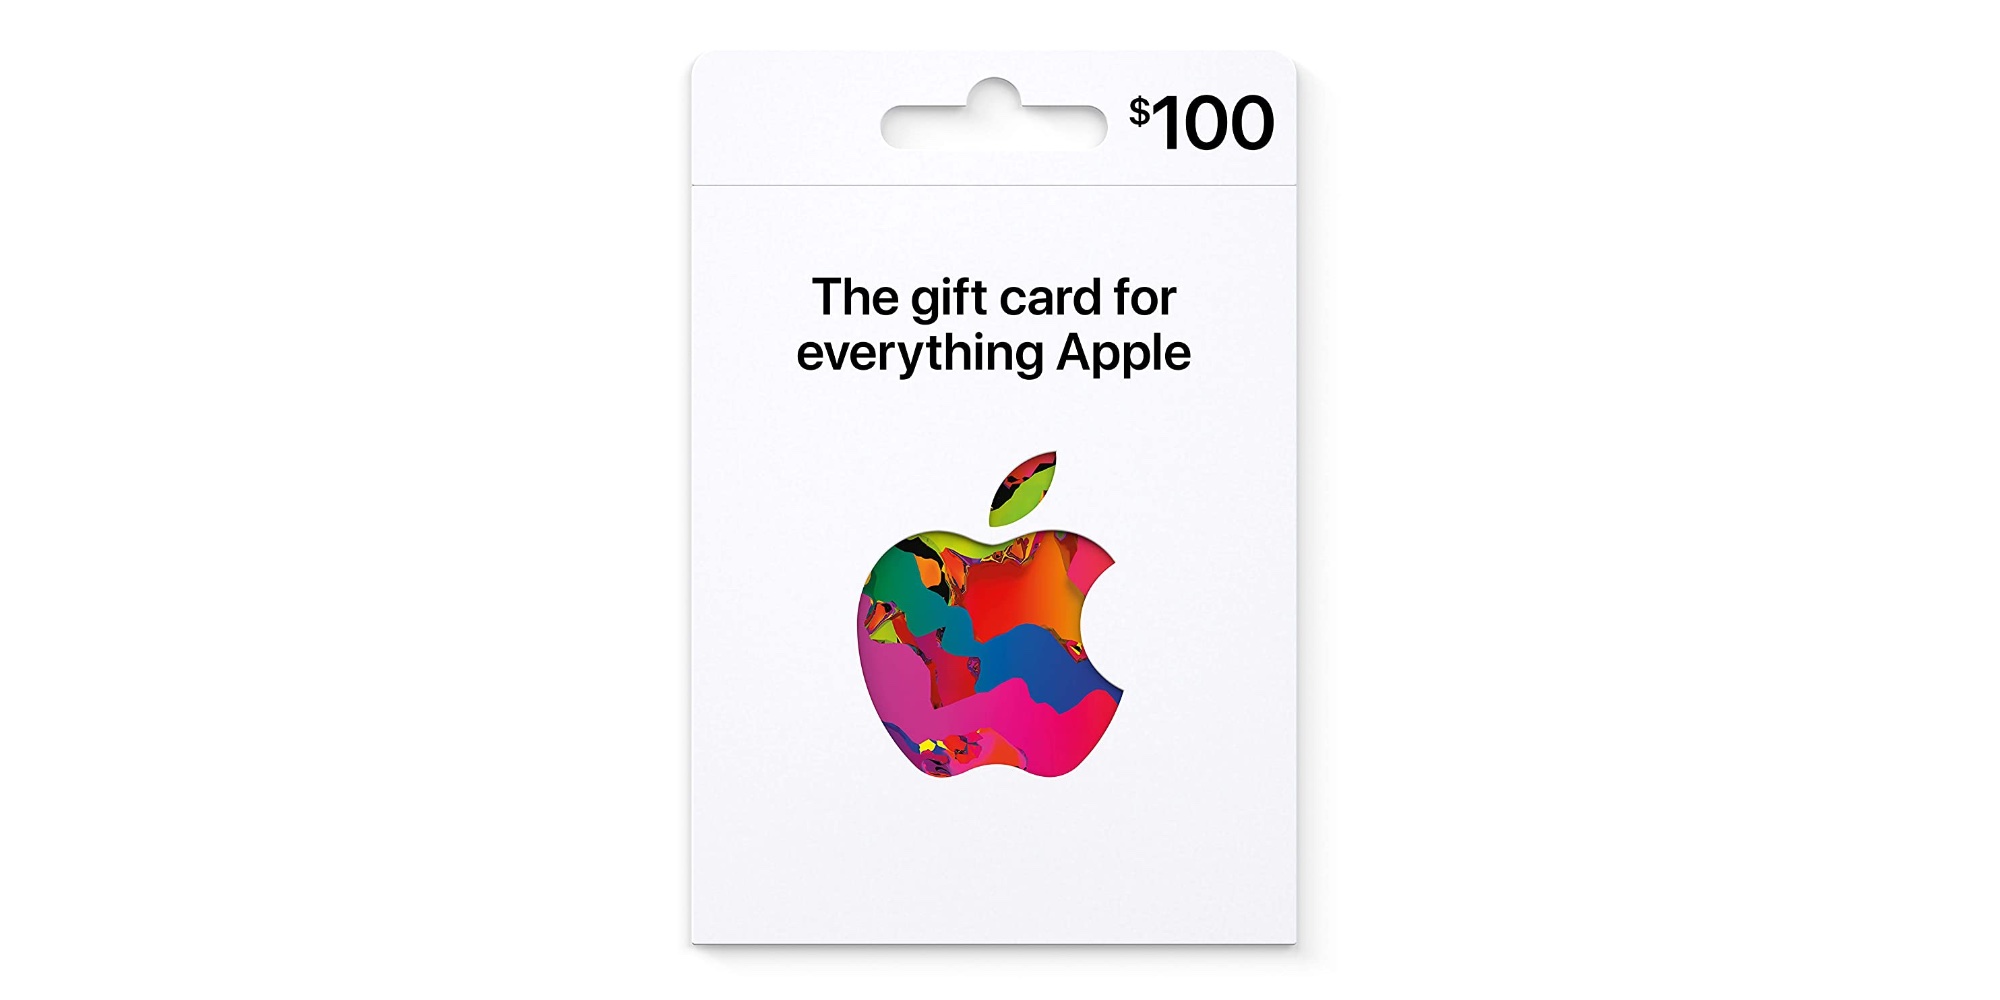 Buy A $100 Apple Gift Card And Score A Free $10 Best Buy Credit